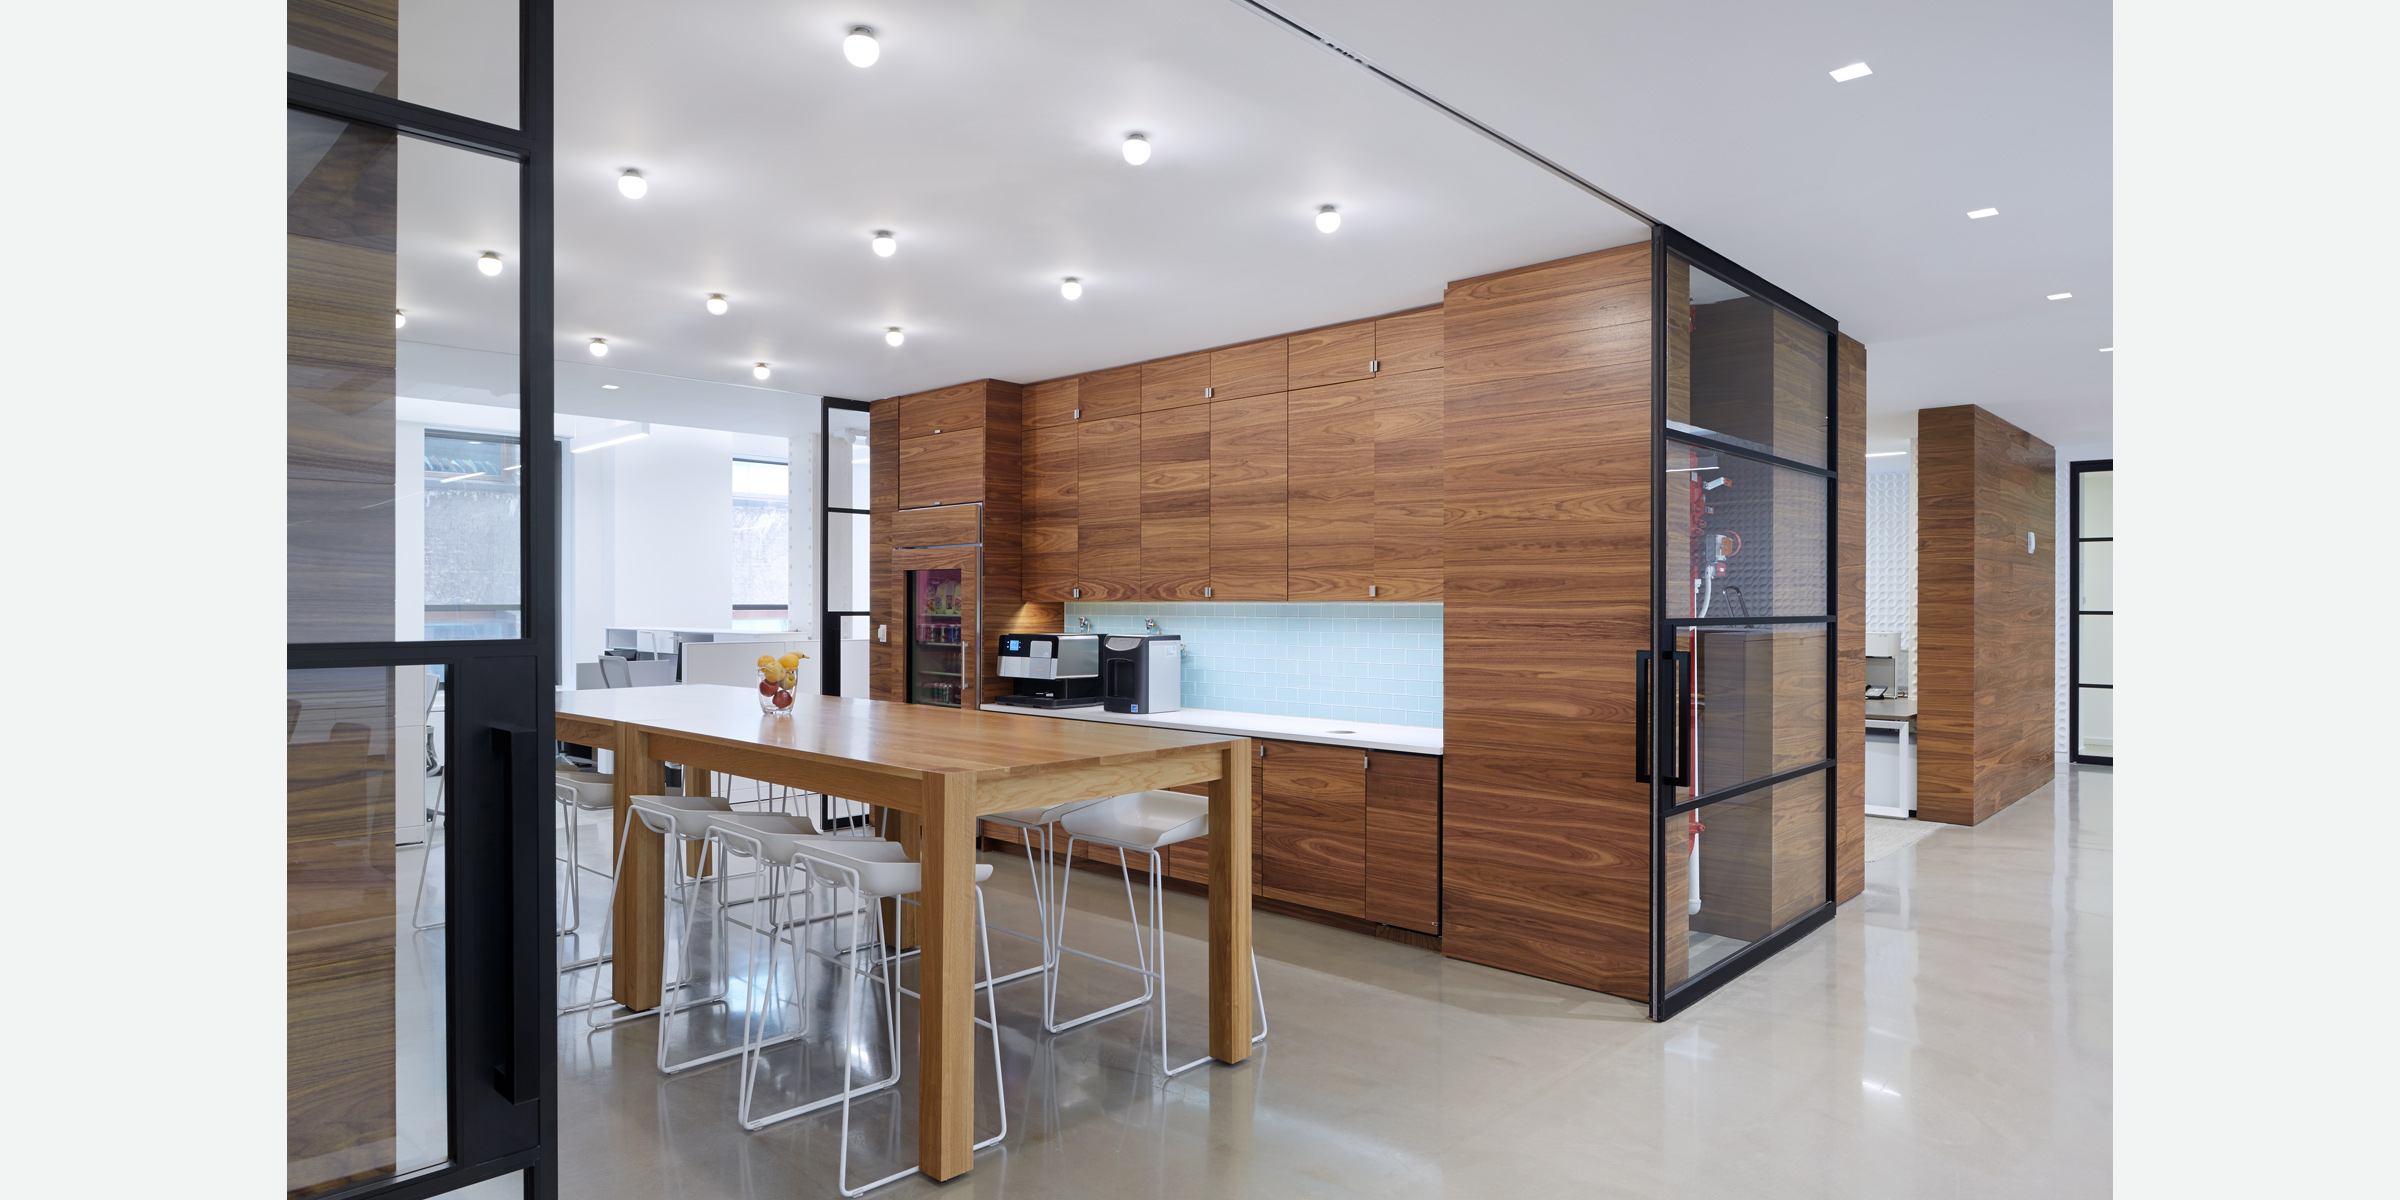 Space Reconfiguration using sliding stacking walls, swing doors, fixed panels | Acxiom Corporate Headquarters | Wide Opening Without Tracks on the Floor | Architect: Amy Lopez-Cepero Architects